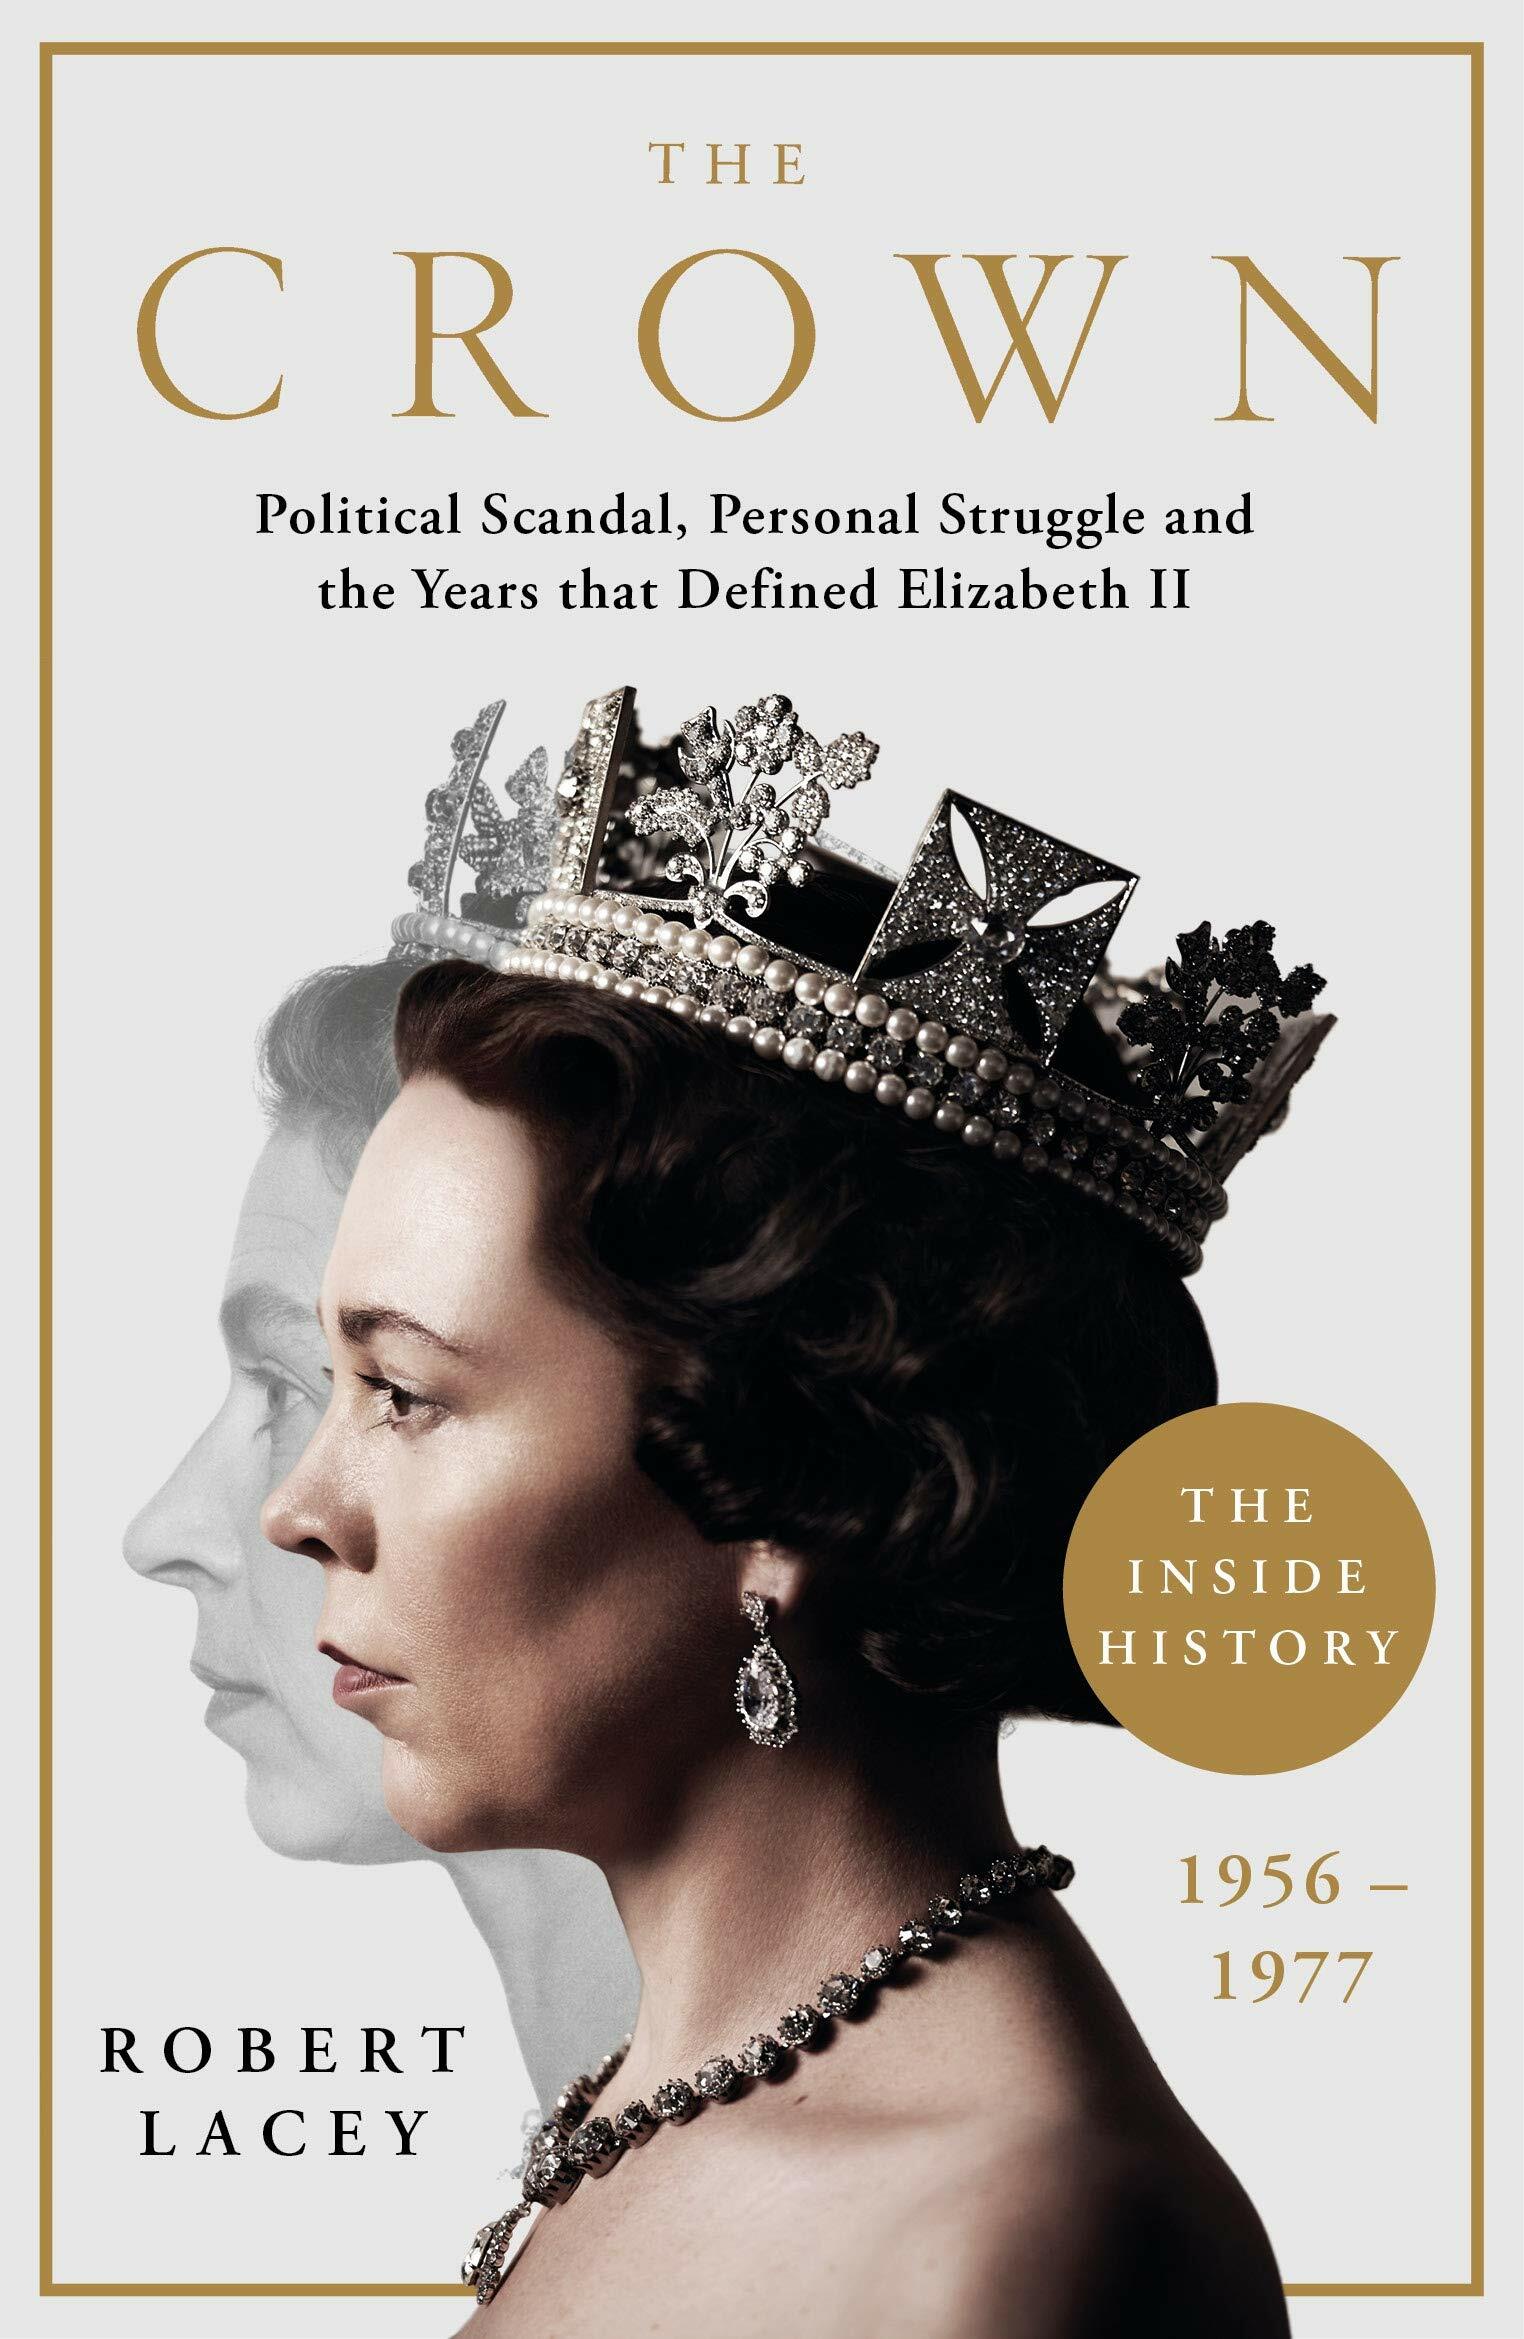 The Crown : The Official History Behind Season 3: Political Scandal, Personal Struggle and the Years that Defined Elizabeth II, 1956-1977 (Paperback)